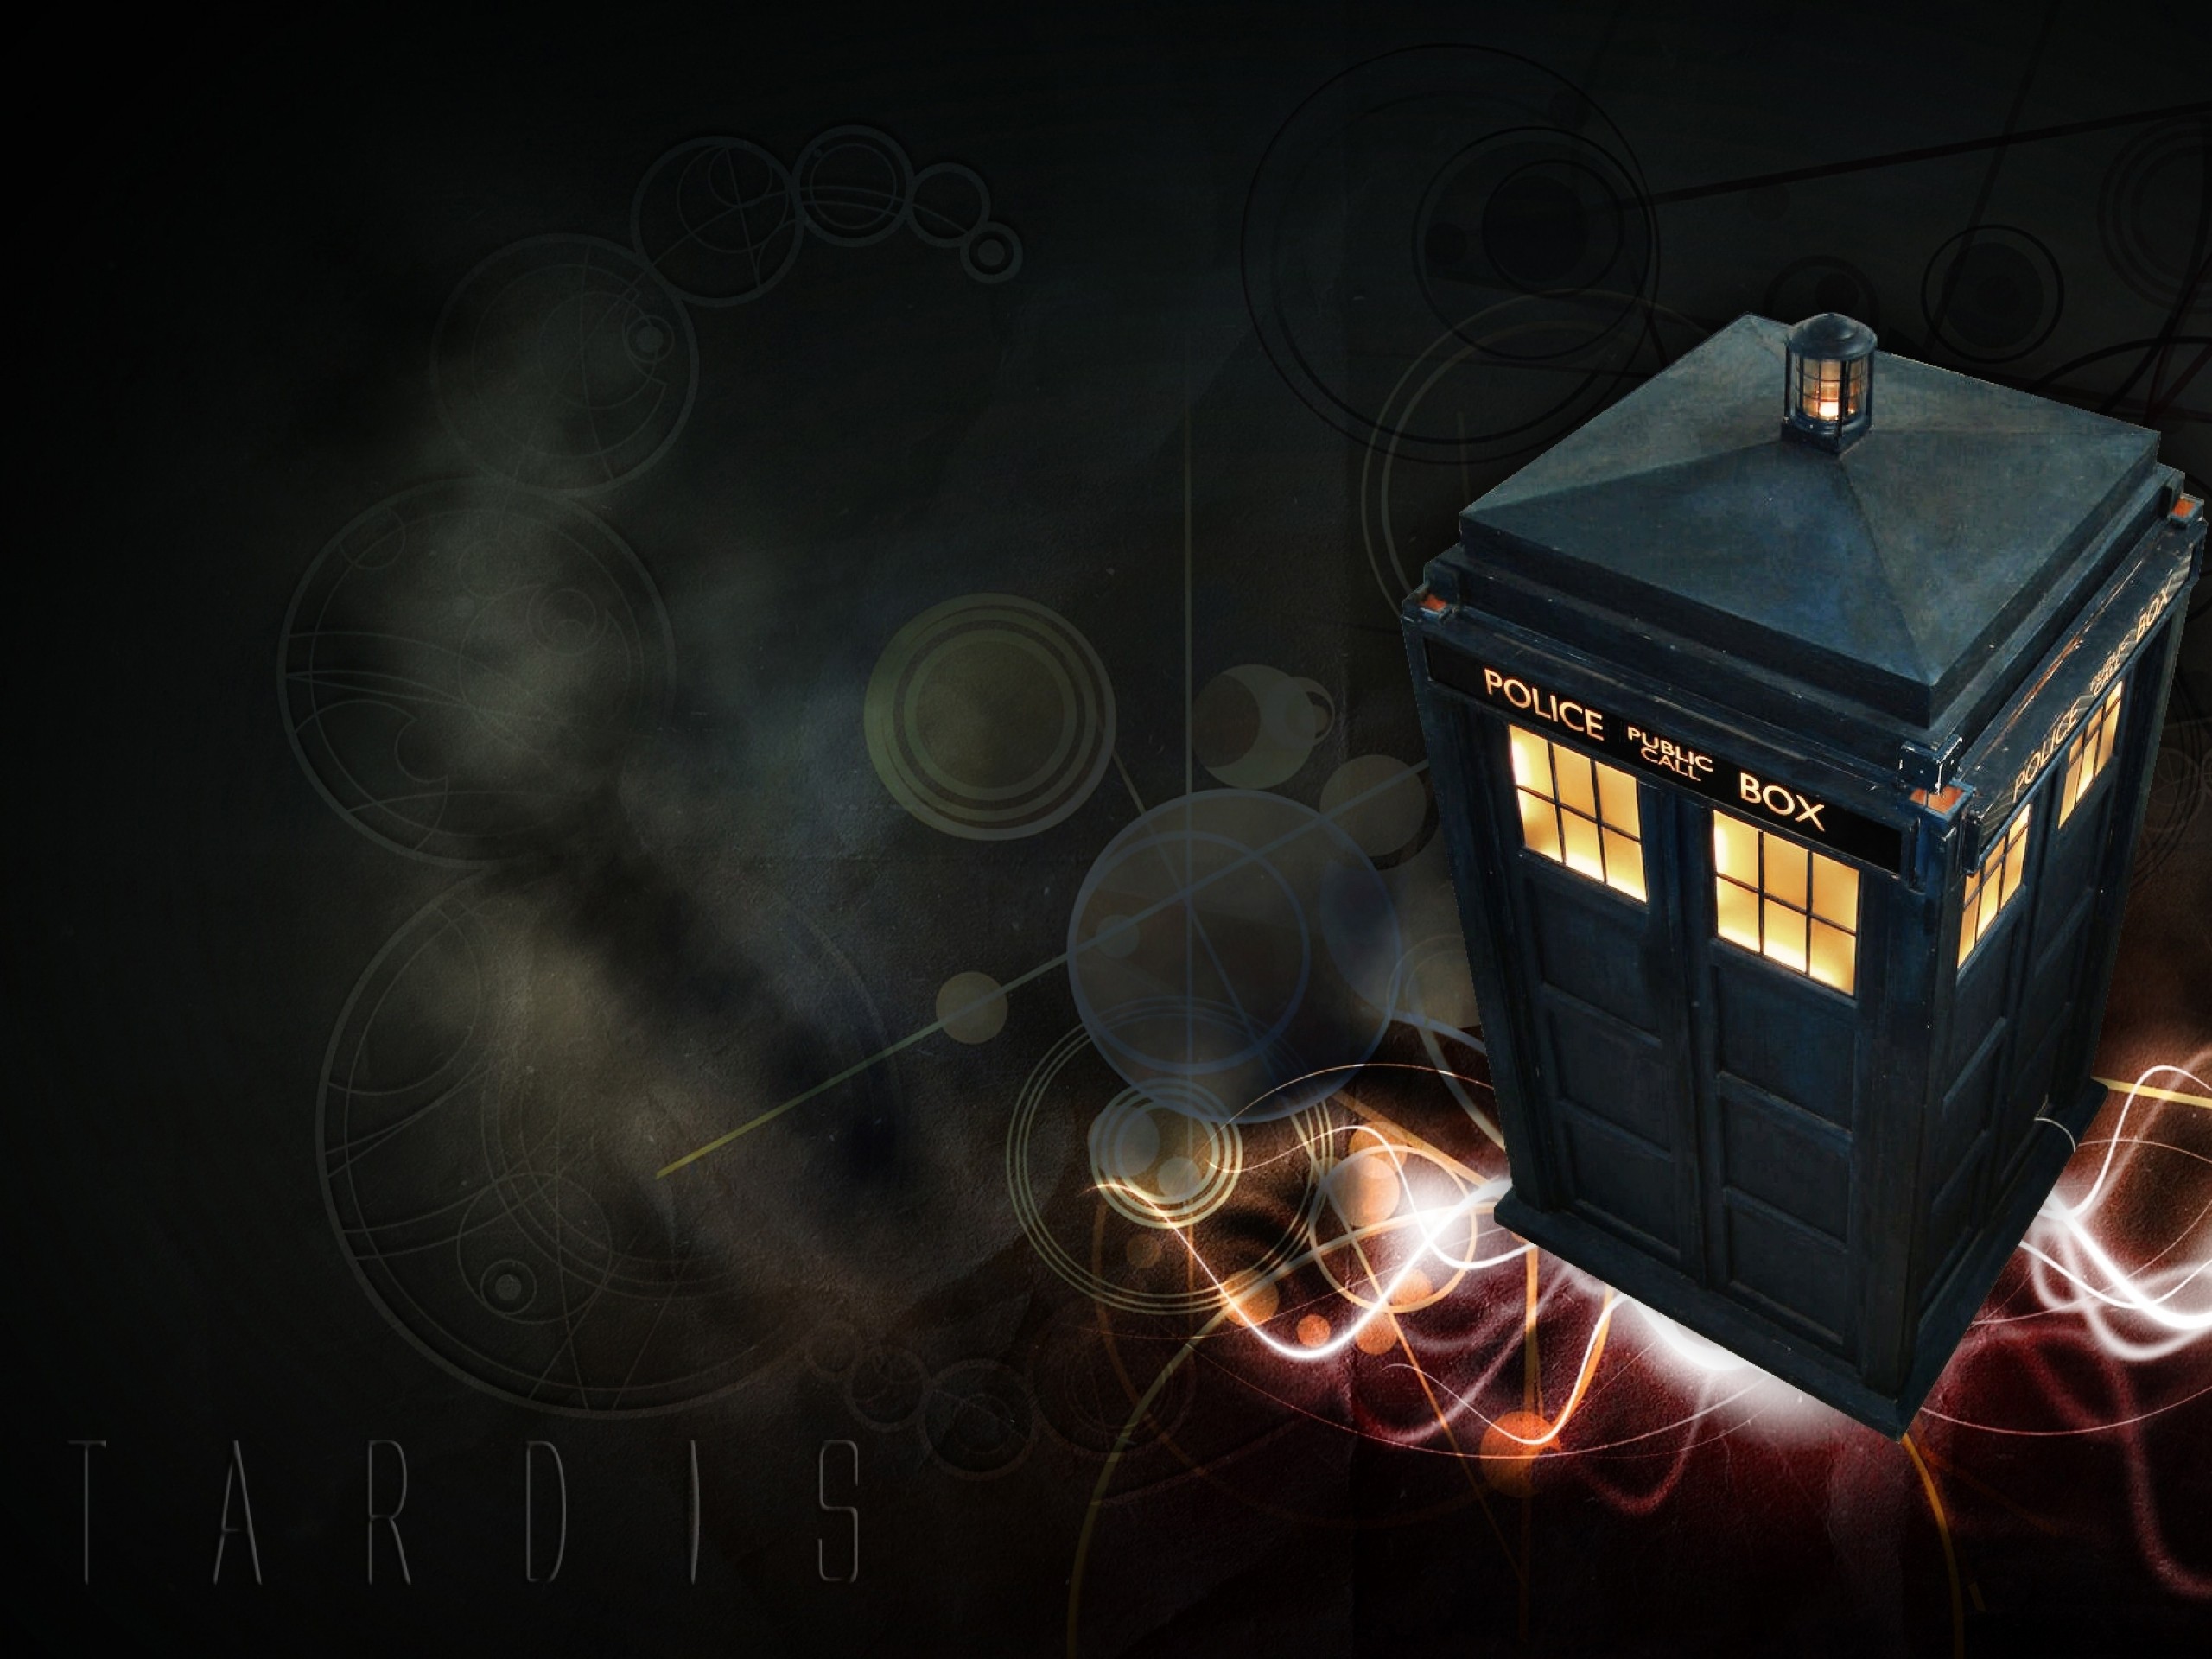 General 2560x1920 Doctor Who The Doctor TARDIS science fiction TV series digital art